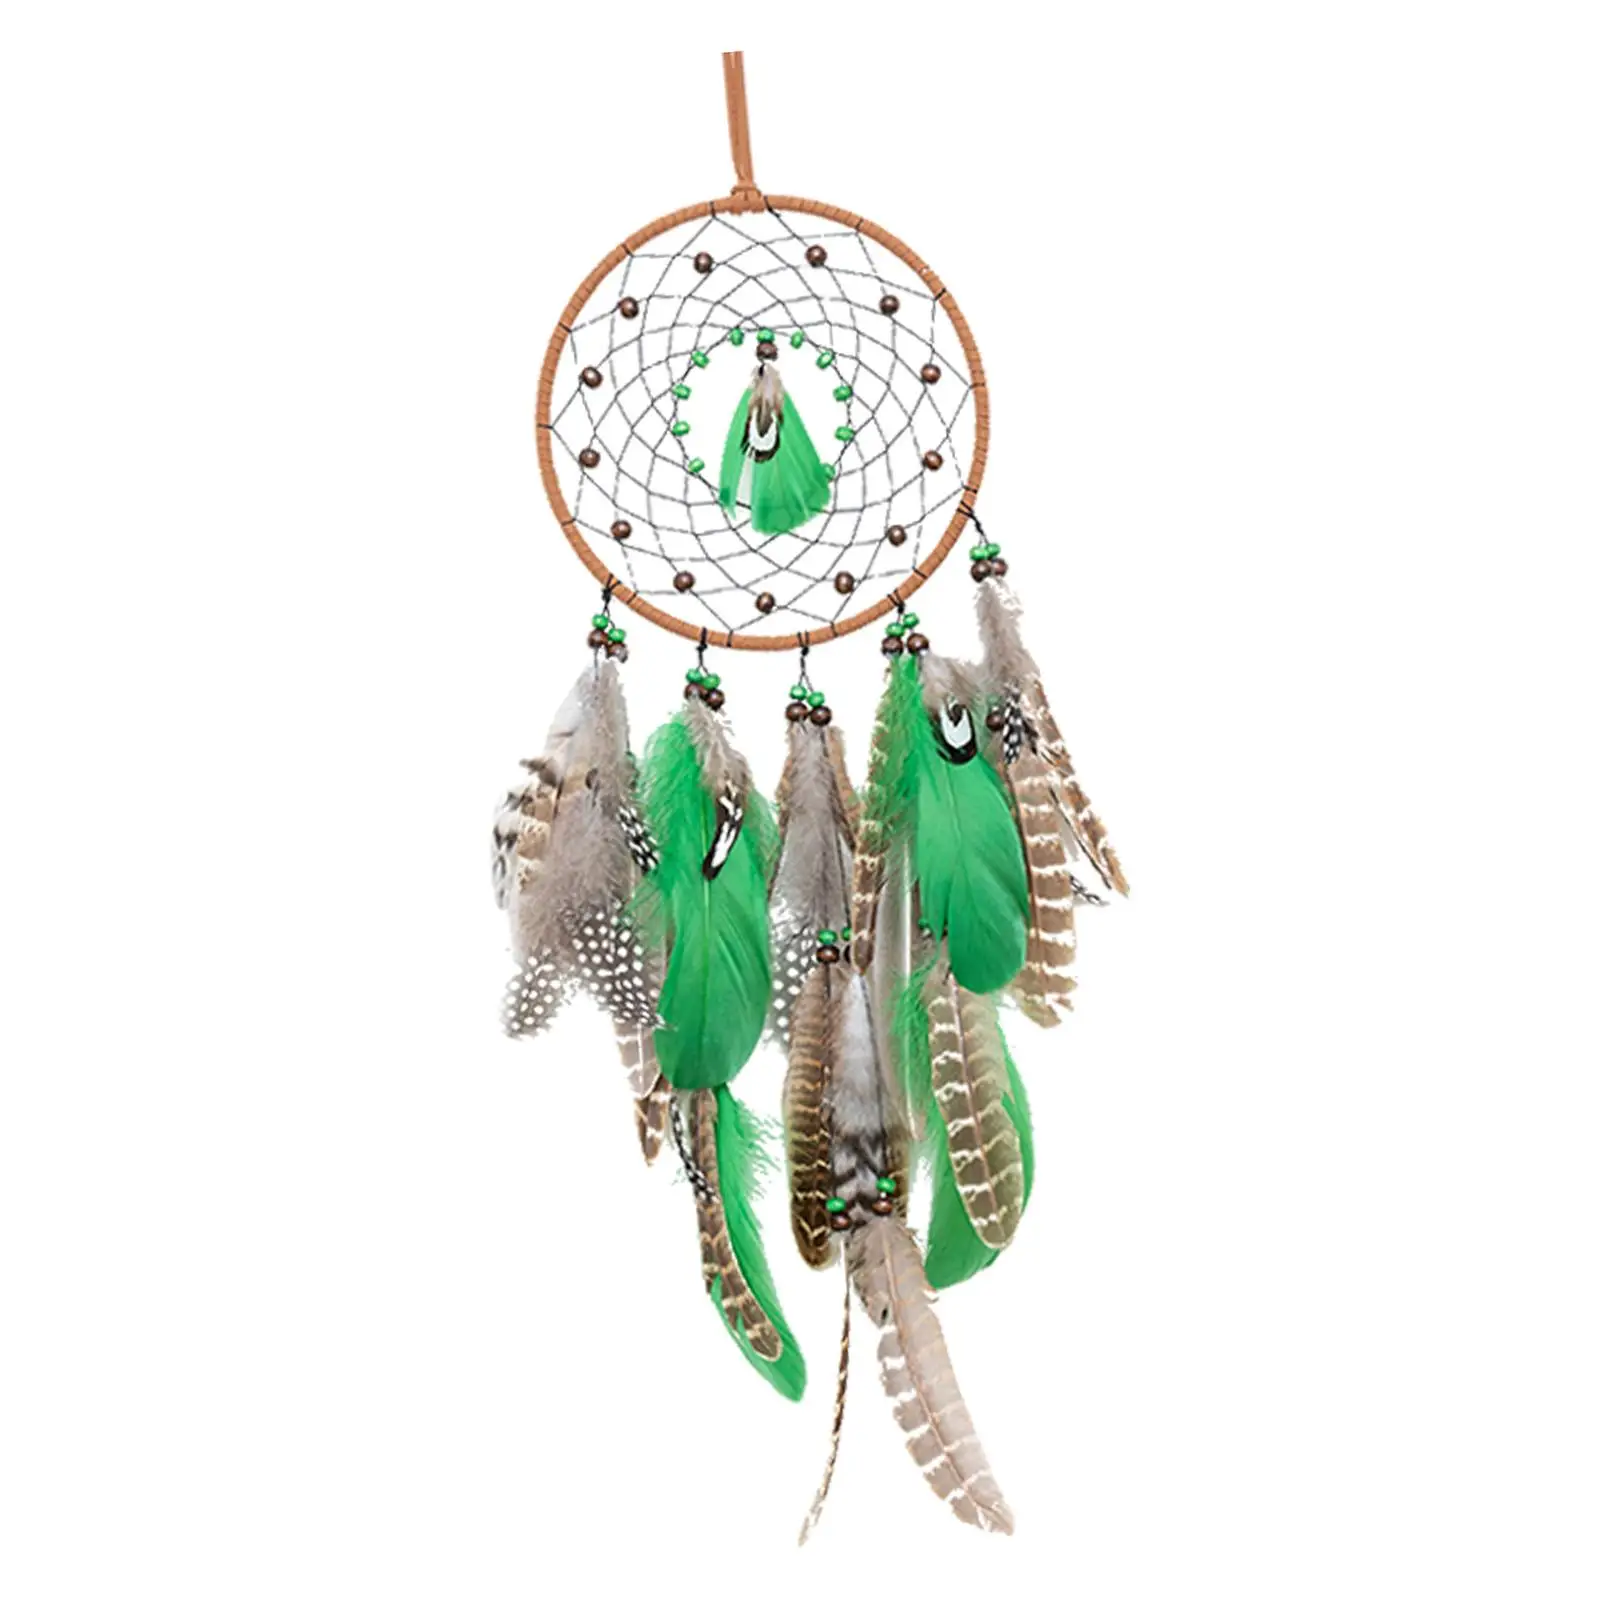 Dream Catcher Wall Hang Portable with Feathers Dream Net Home Decoration Handmade Ornament for Home Native Gift Car Children